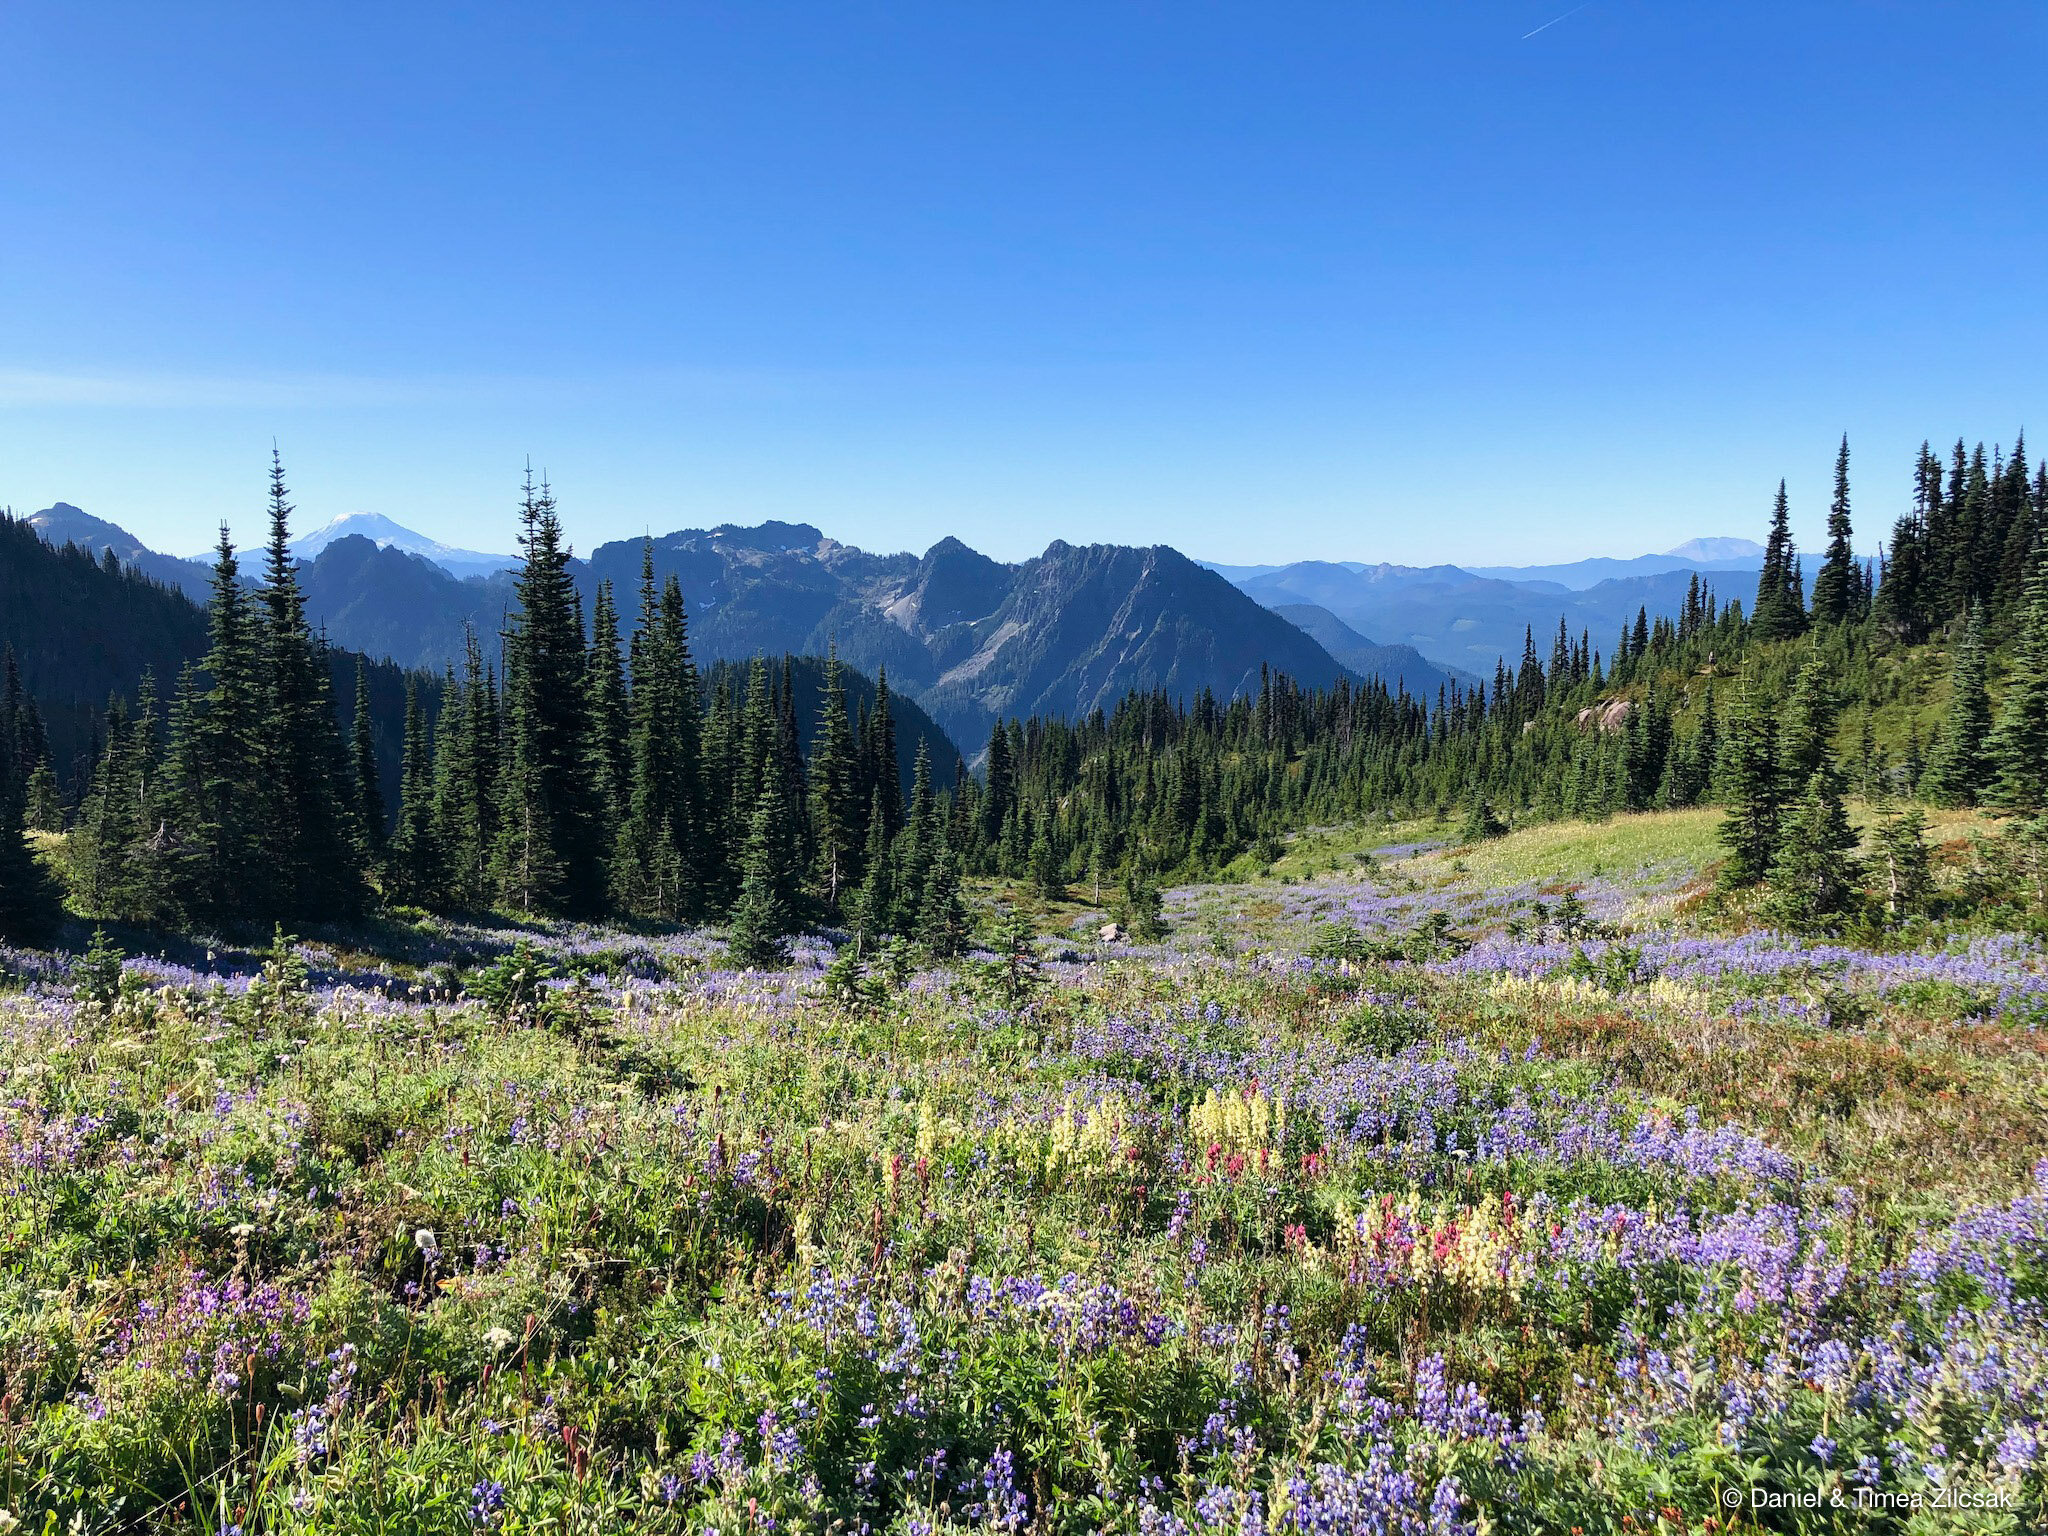 View of the Tatoosh Range in the foreground, Mount Adams to the left and St. Helens to the right